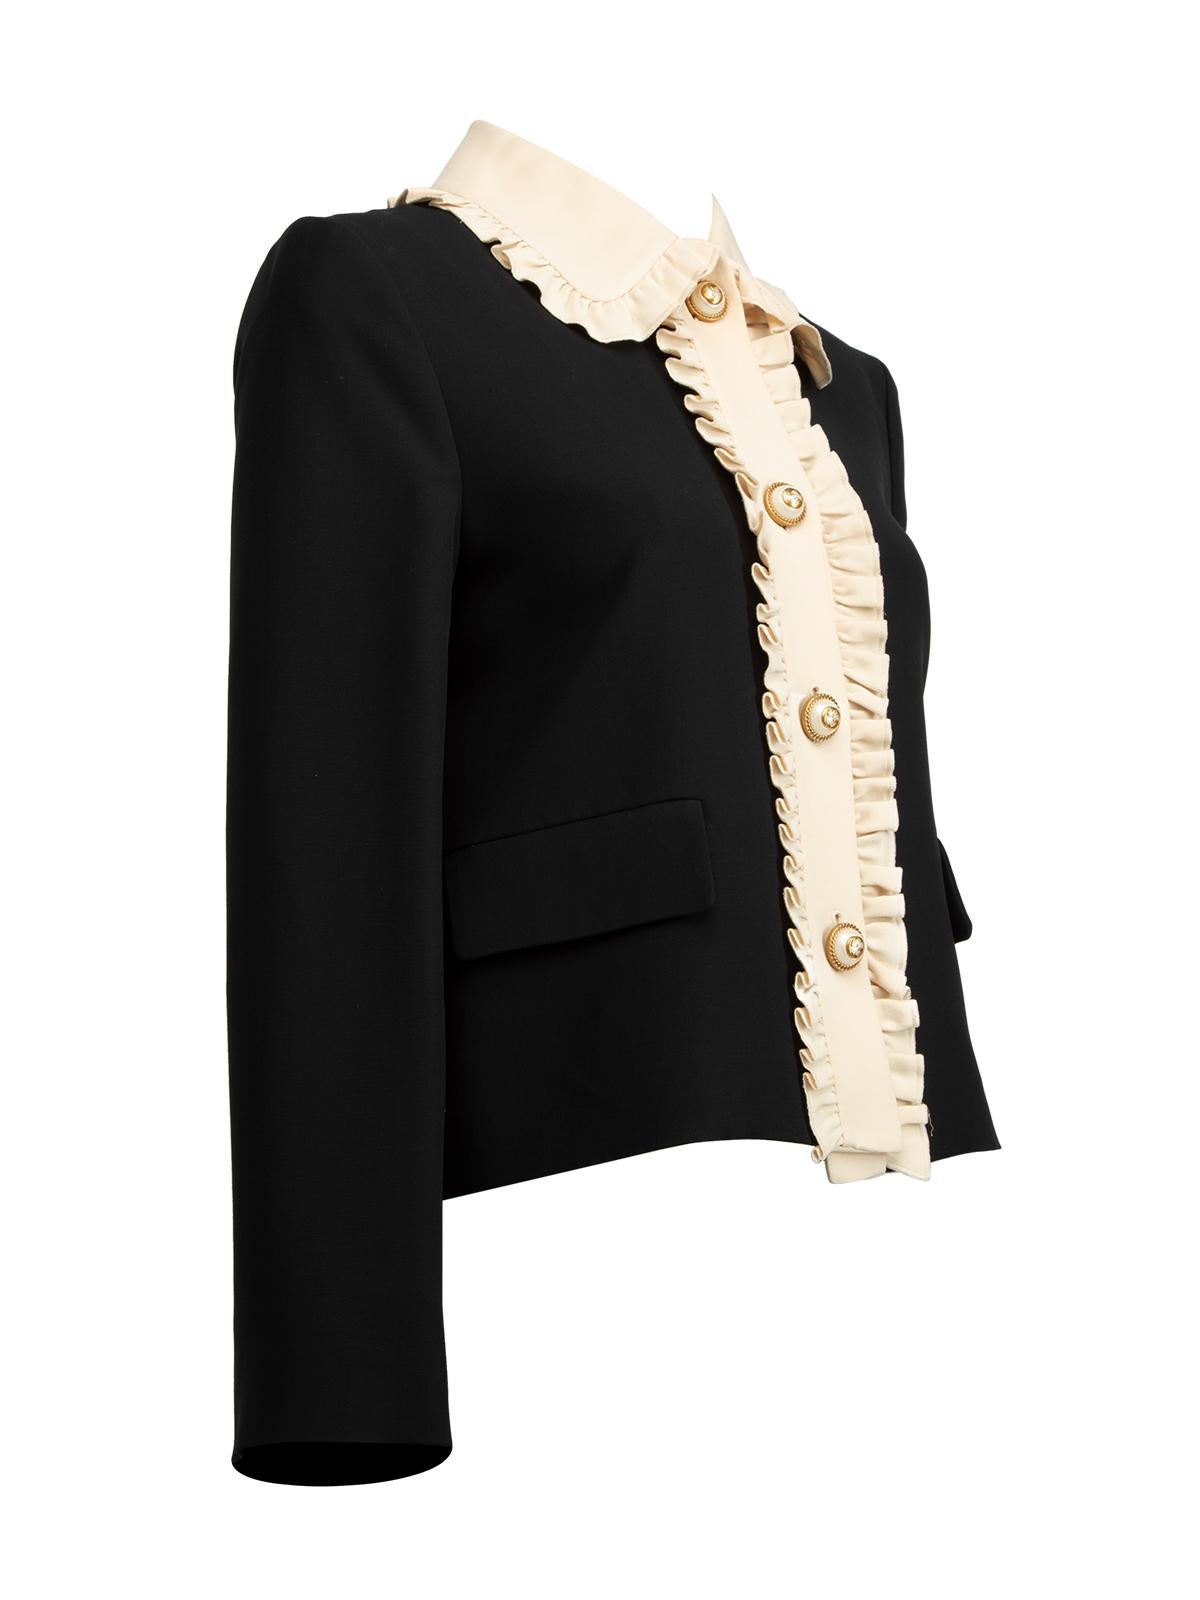 CONDITION is Very good. Minimal wear to jacket is evident. Minimal wear to inside of lapel on this used Gucci designer resale item. Details Black with cream contrast Wool Long sleeves GG gold & pearlescent button design Ruffle collar trim with